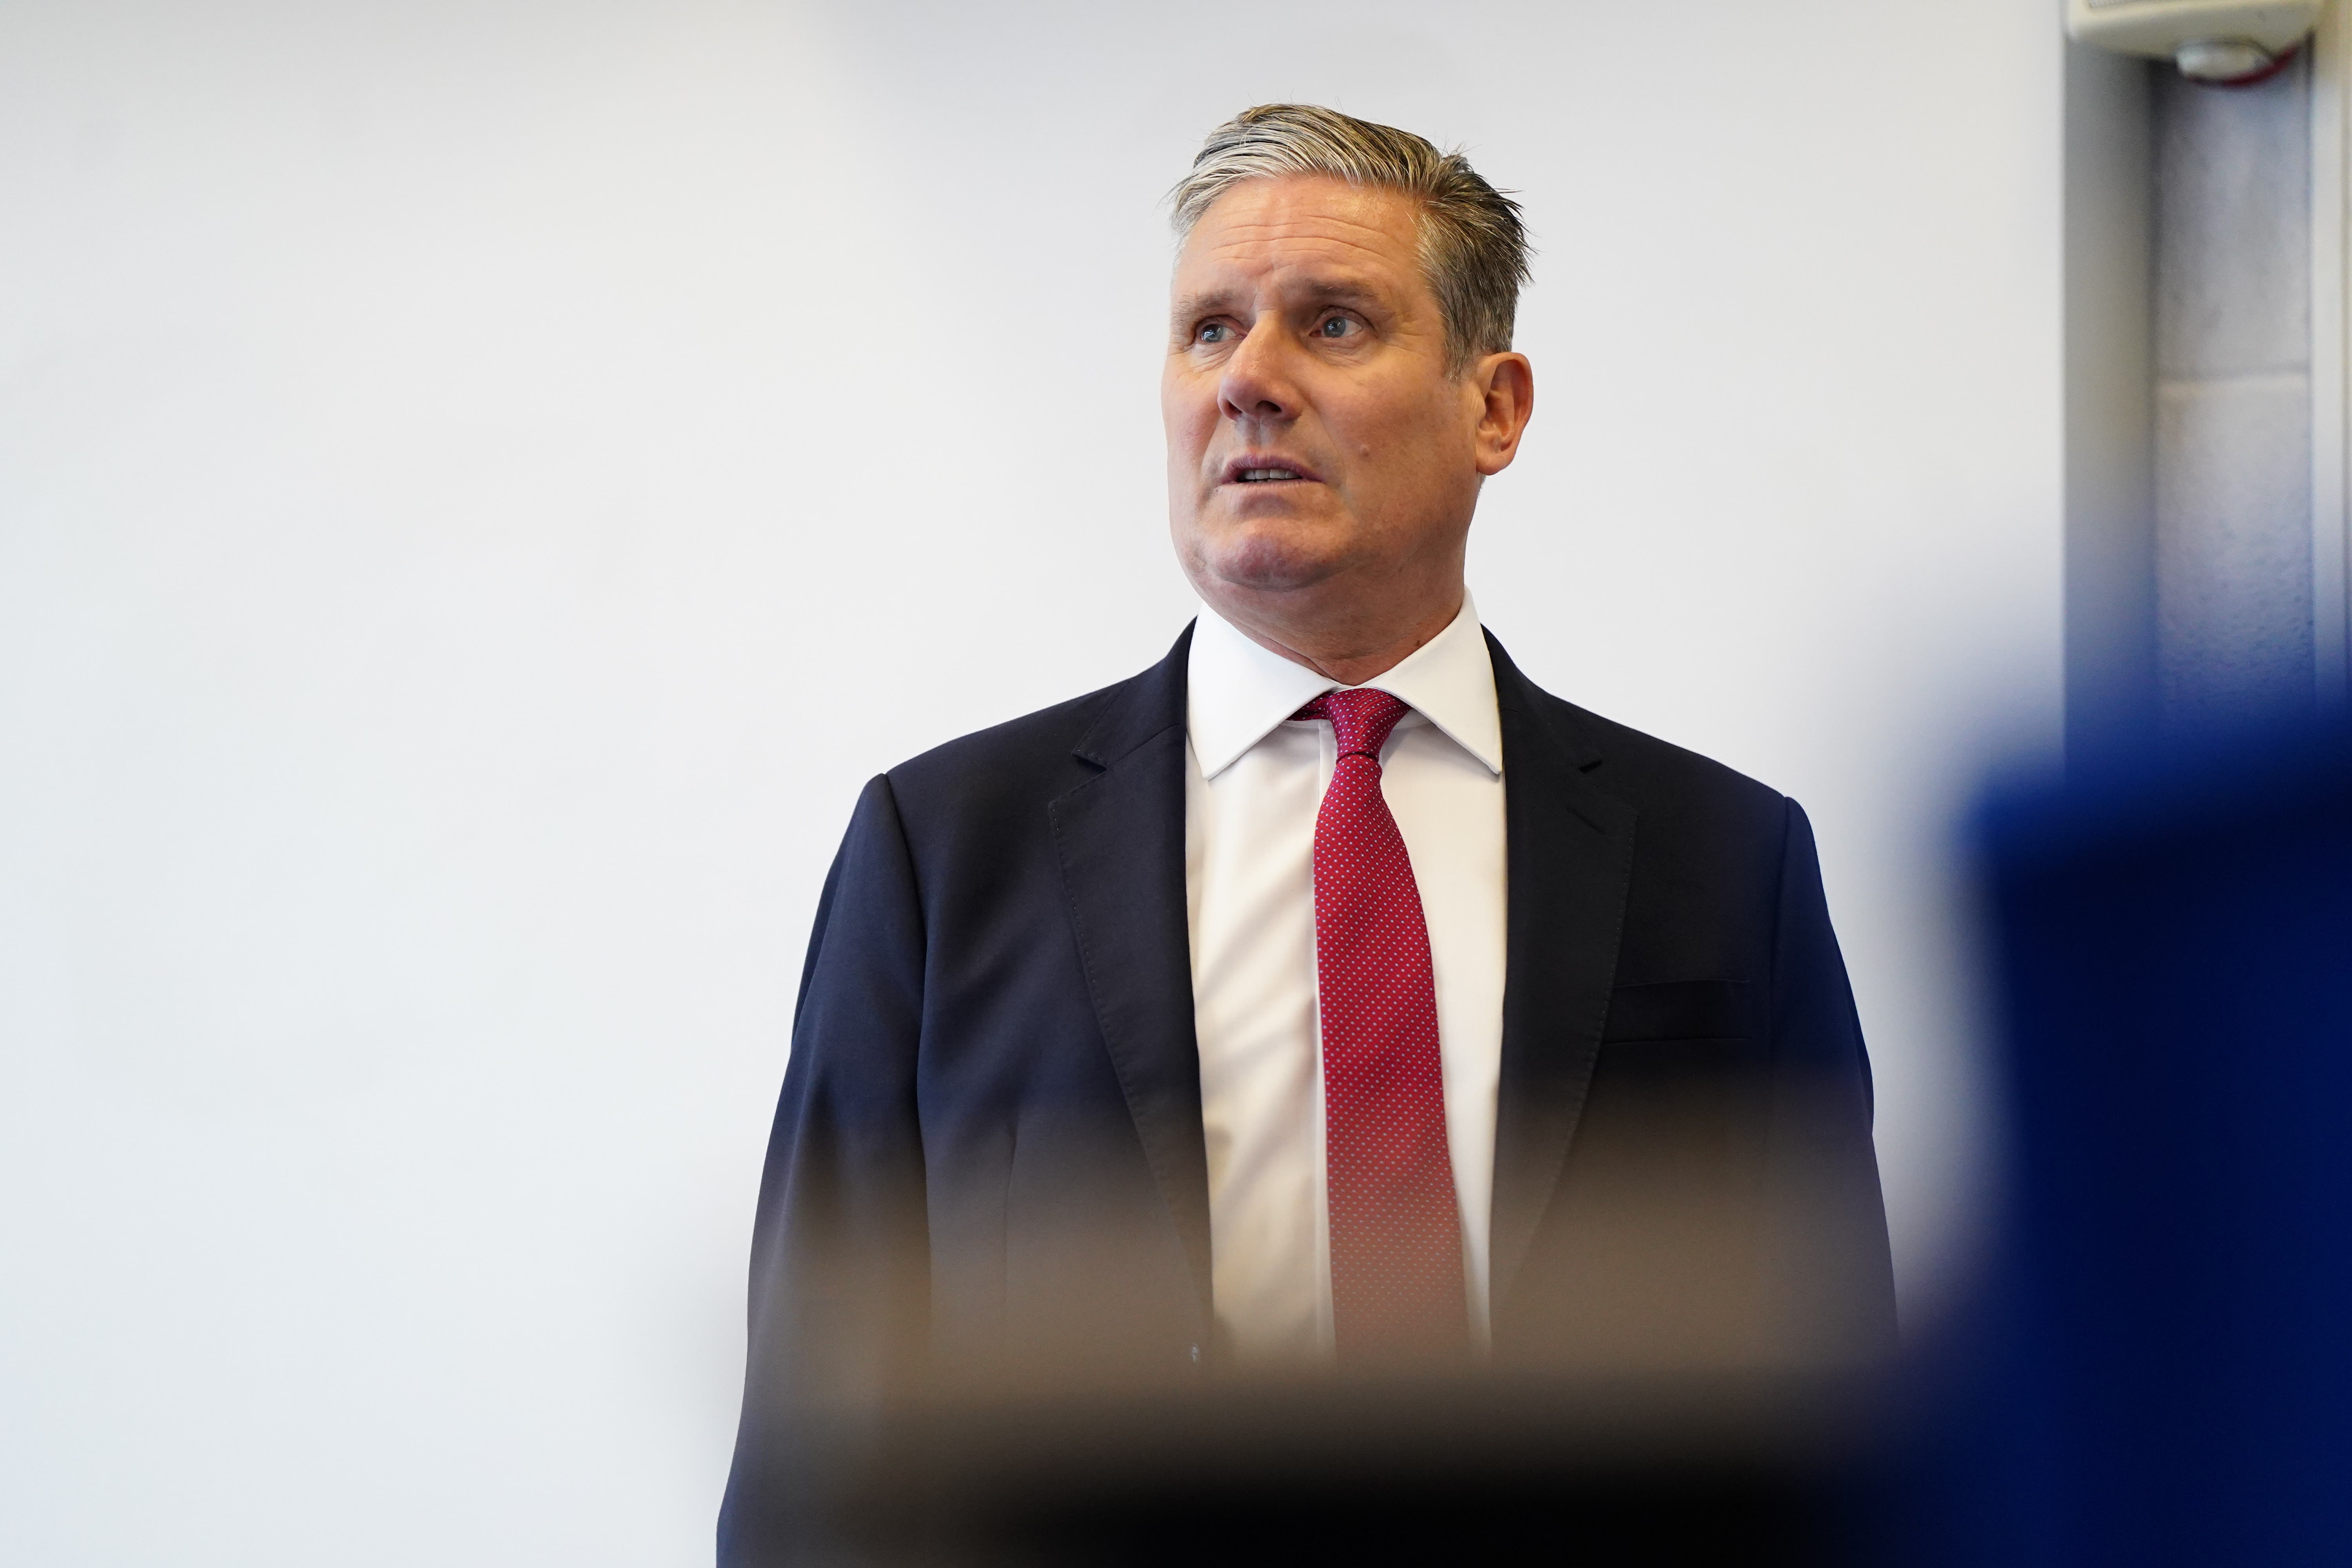 Keir Starmer is taking a risk with this hint of ‘class war’ politics